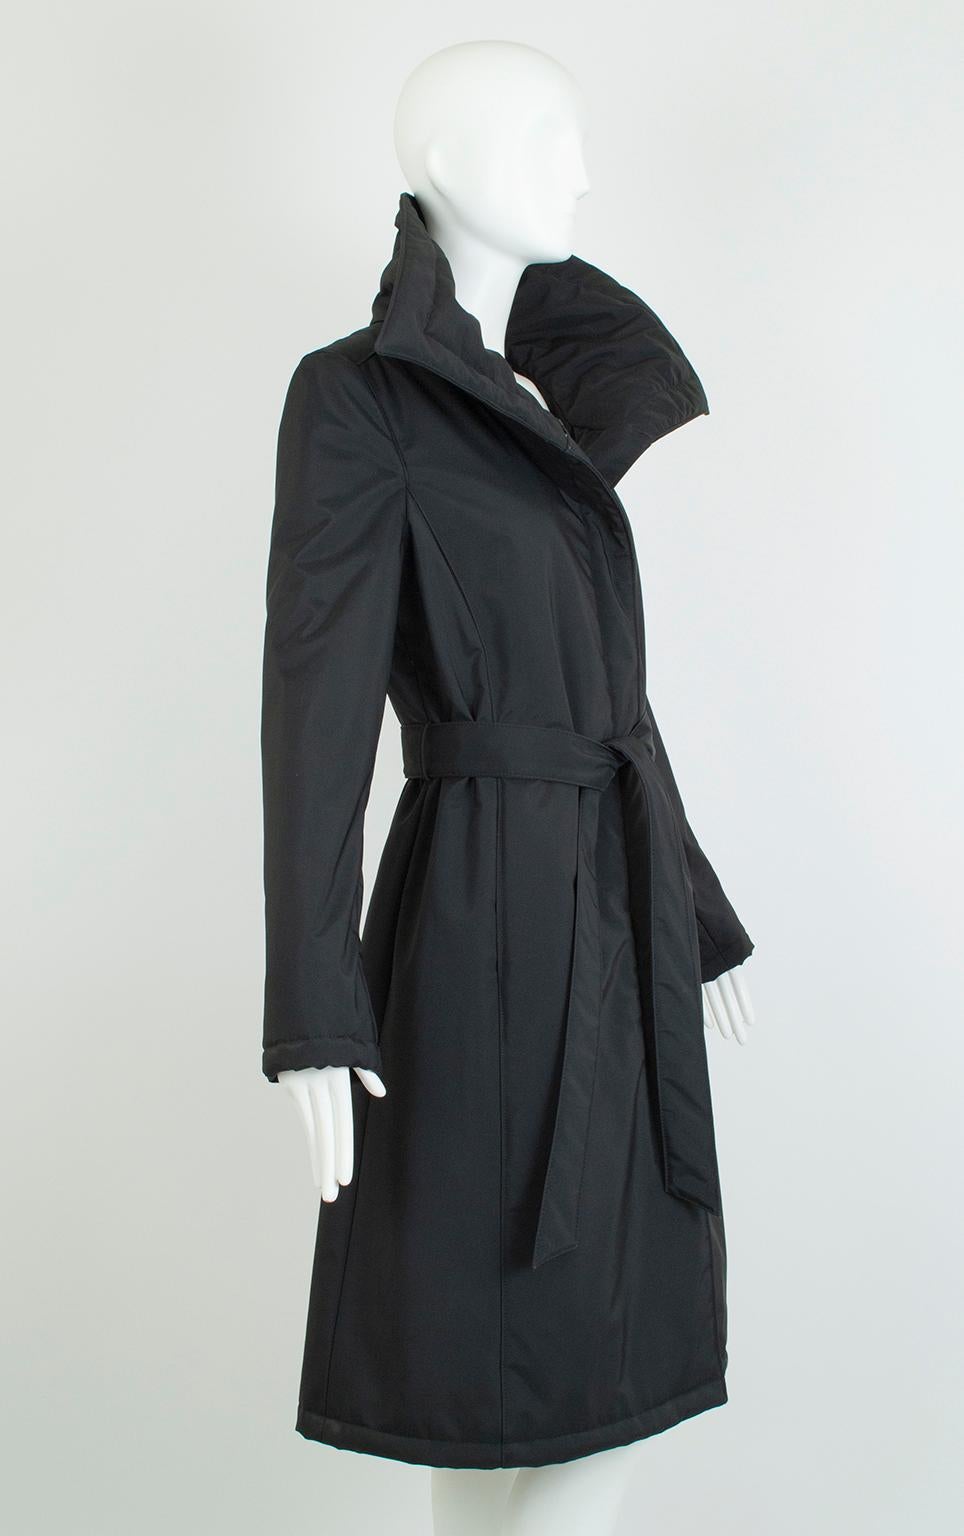 Looking smart and staying warm need not be mutually exclusive. To wit, this Searle princess seam trench coat combines sleek, elegant lines with the warmth and water-resistance of a down coat twice its size. Its massive portrait collar may be worn